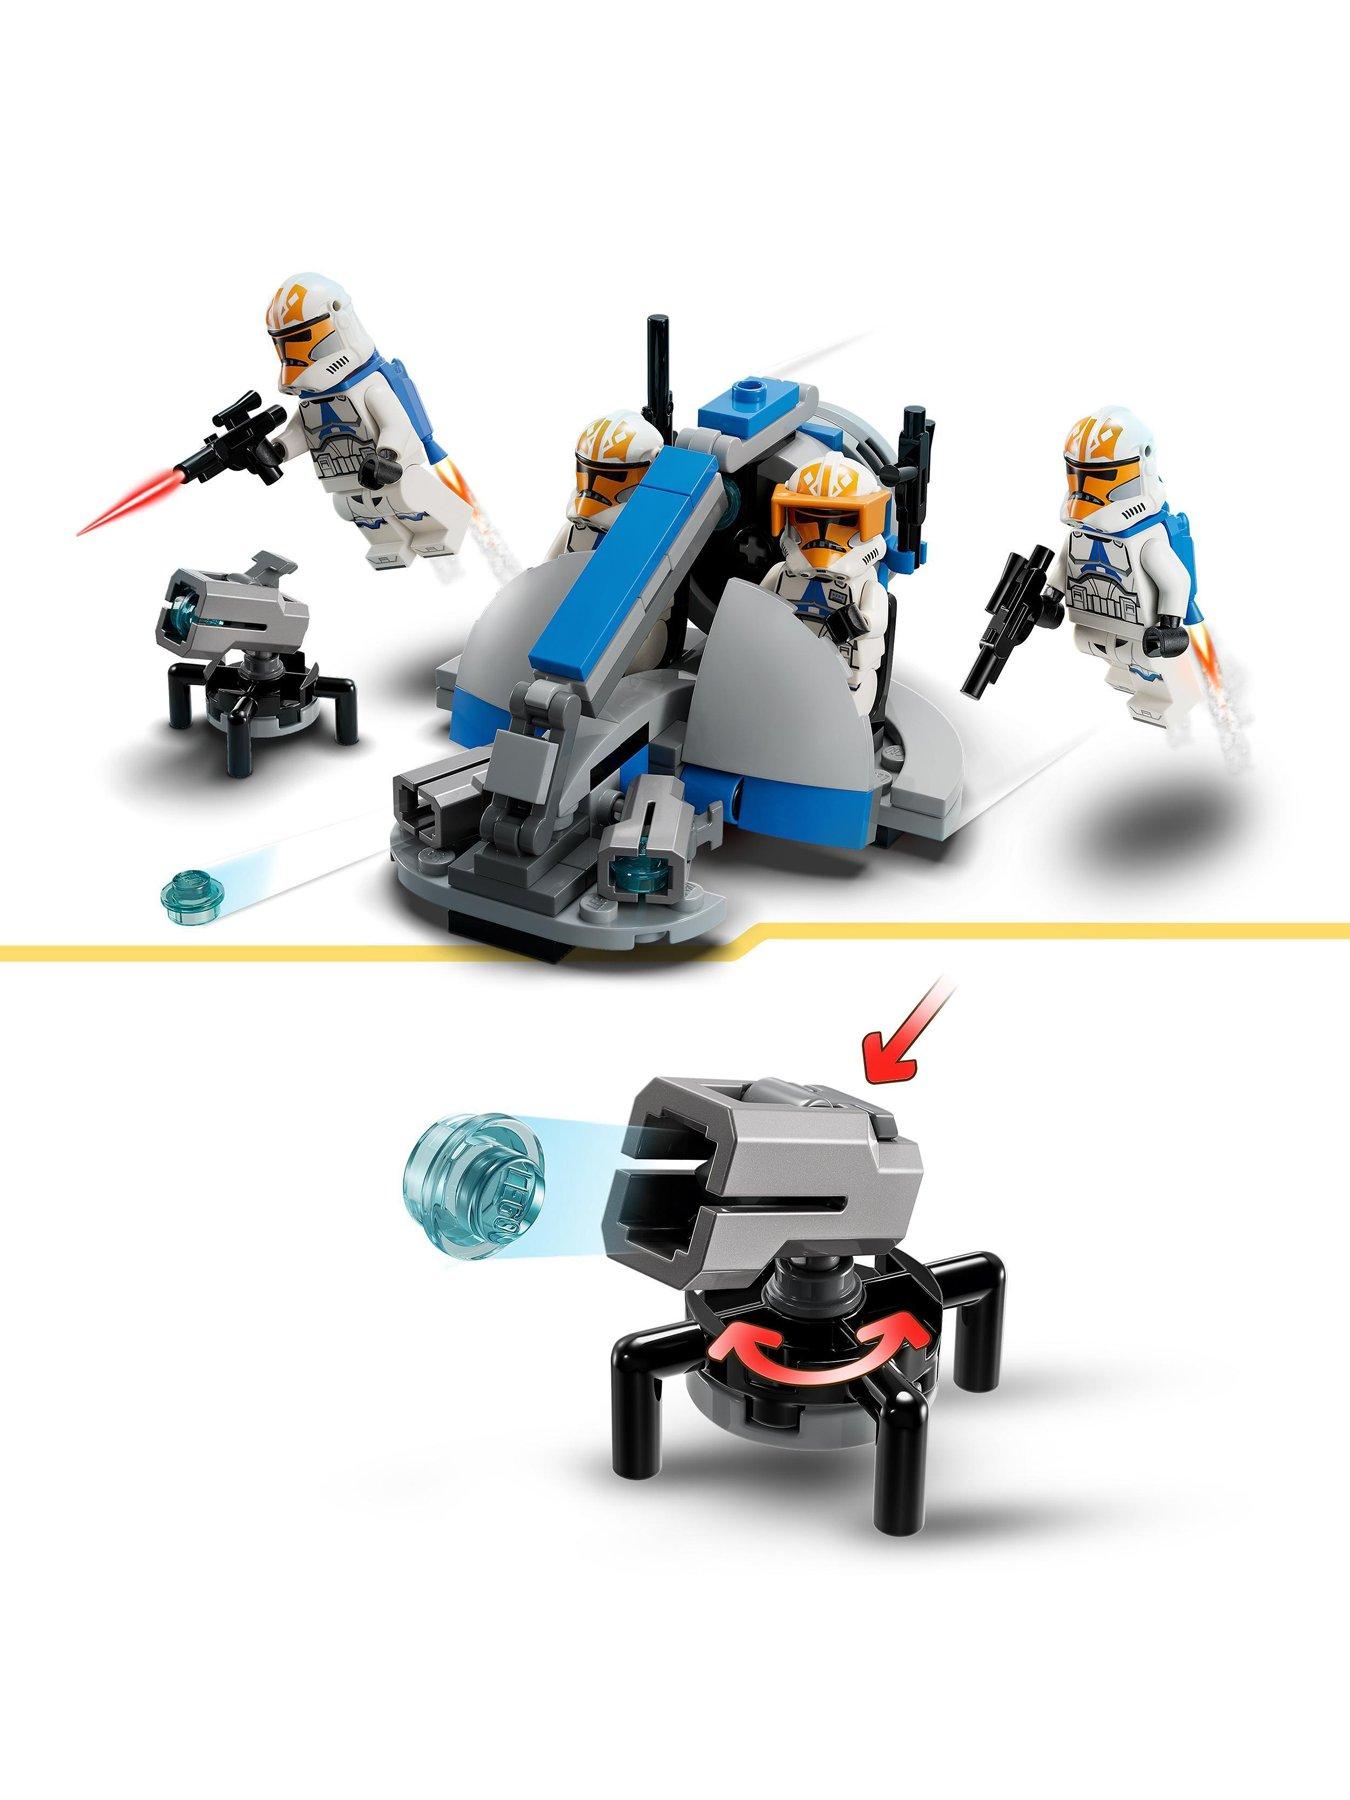 Cancelling LEGO® MINDSTORMS is a Sad Thing. But is it a Bad Thing?